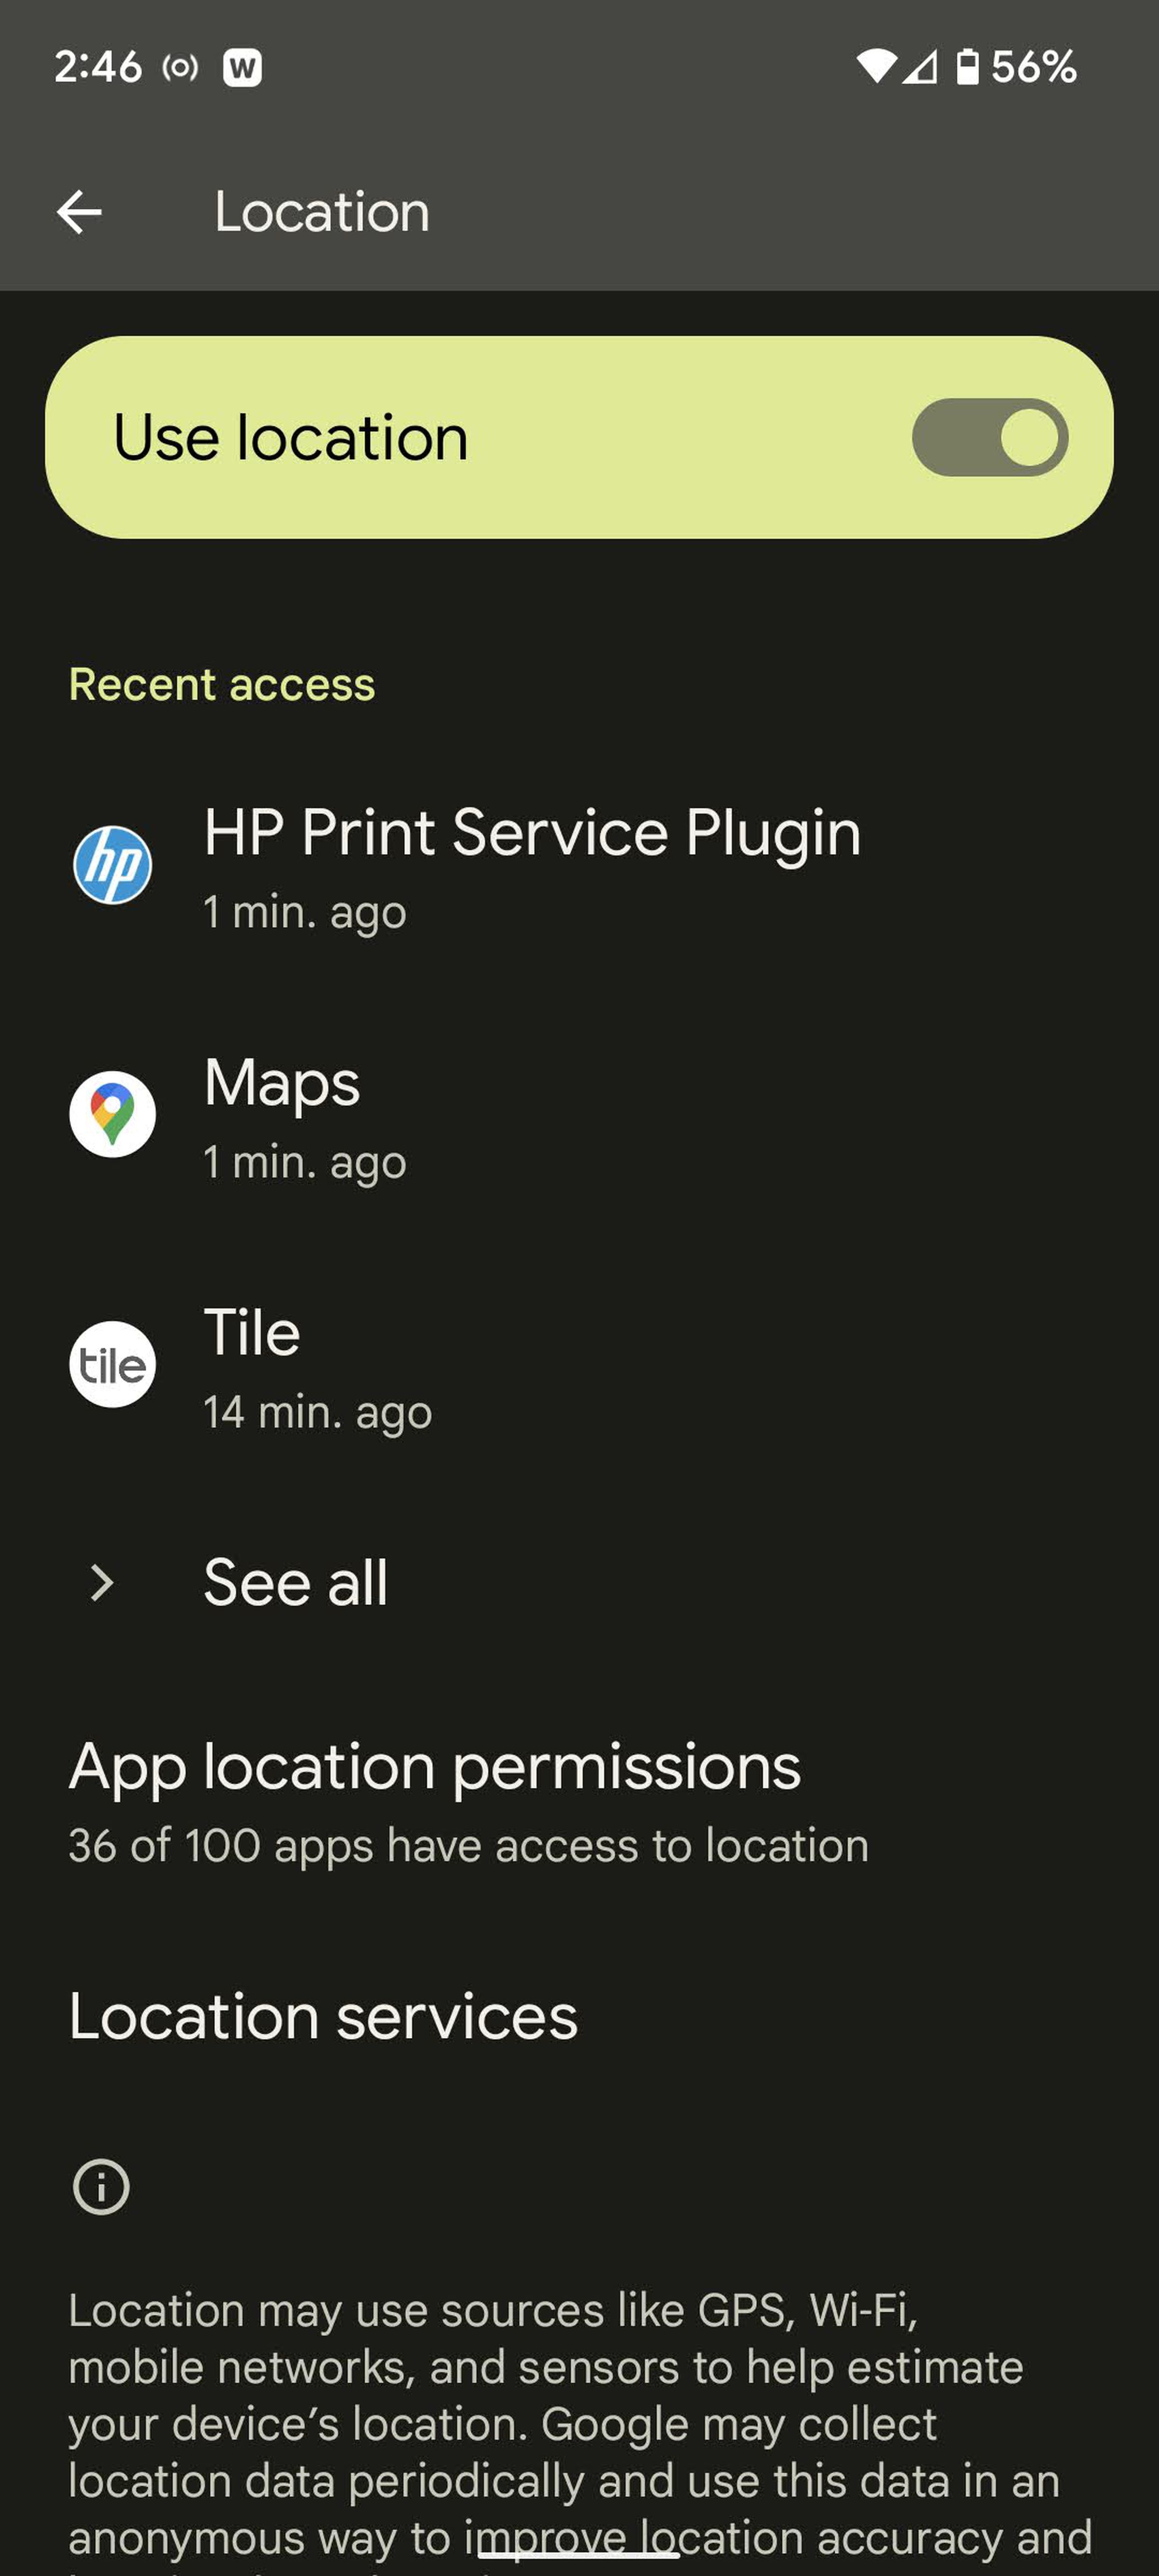 To use Find My Device, location services must be enabled.